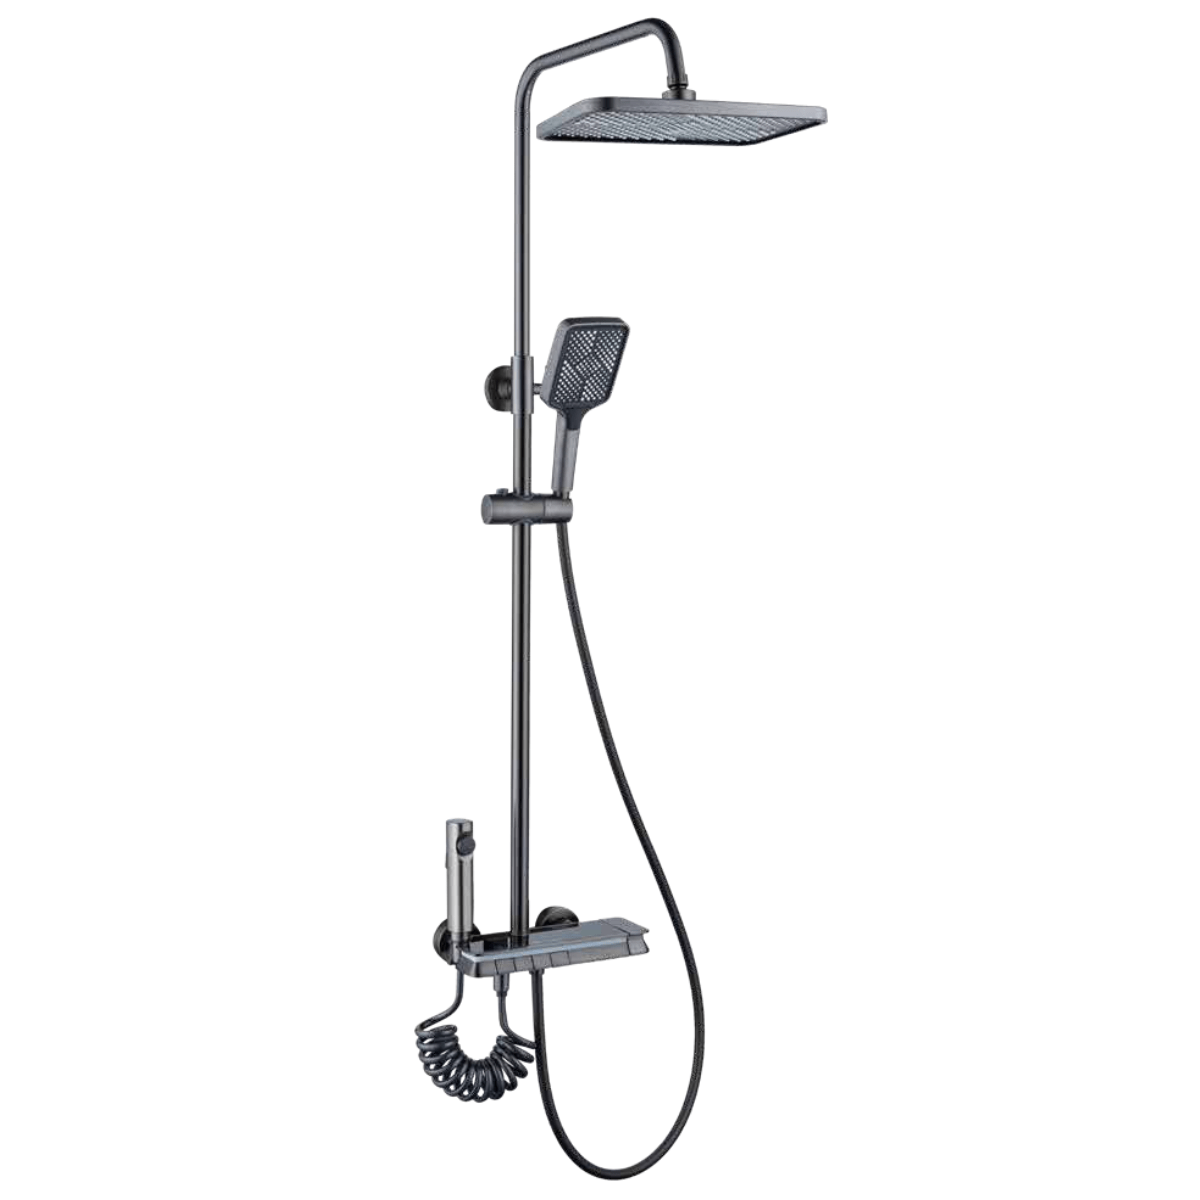 Buy WK Bathroom Gun Grey Wall Mounted Four-Function Square Rain Shower Set with LED, Temperature Reader & Timer - K-8870Q | Shop at Supply Master Accra, Ghana Shower Set Buy Tools hardware Building materials